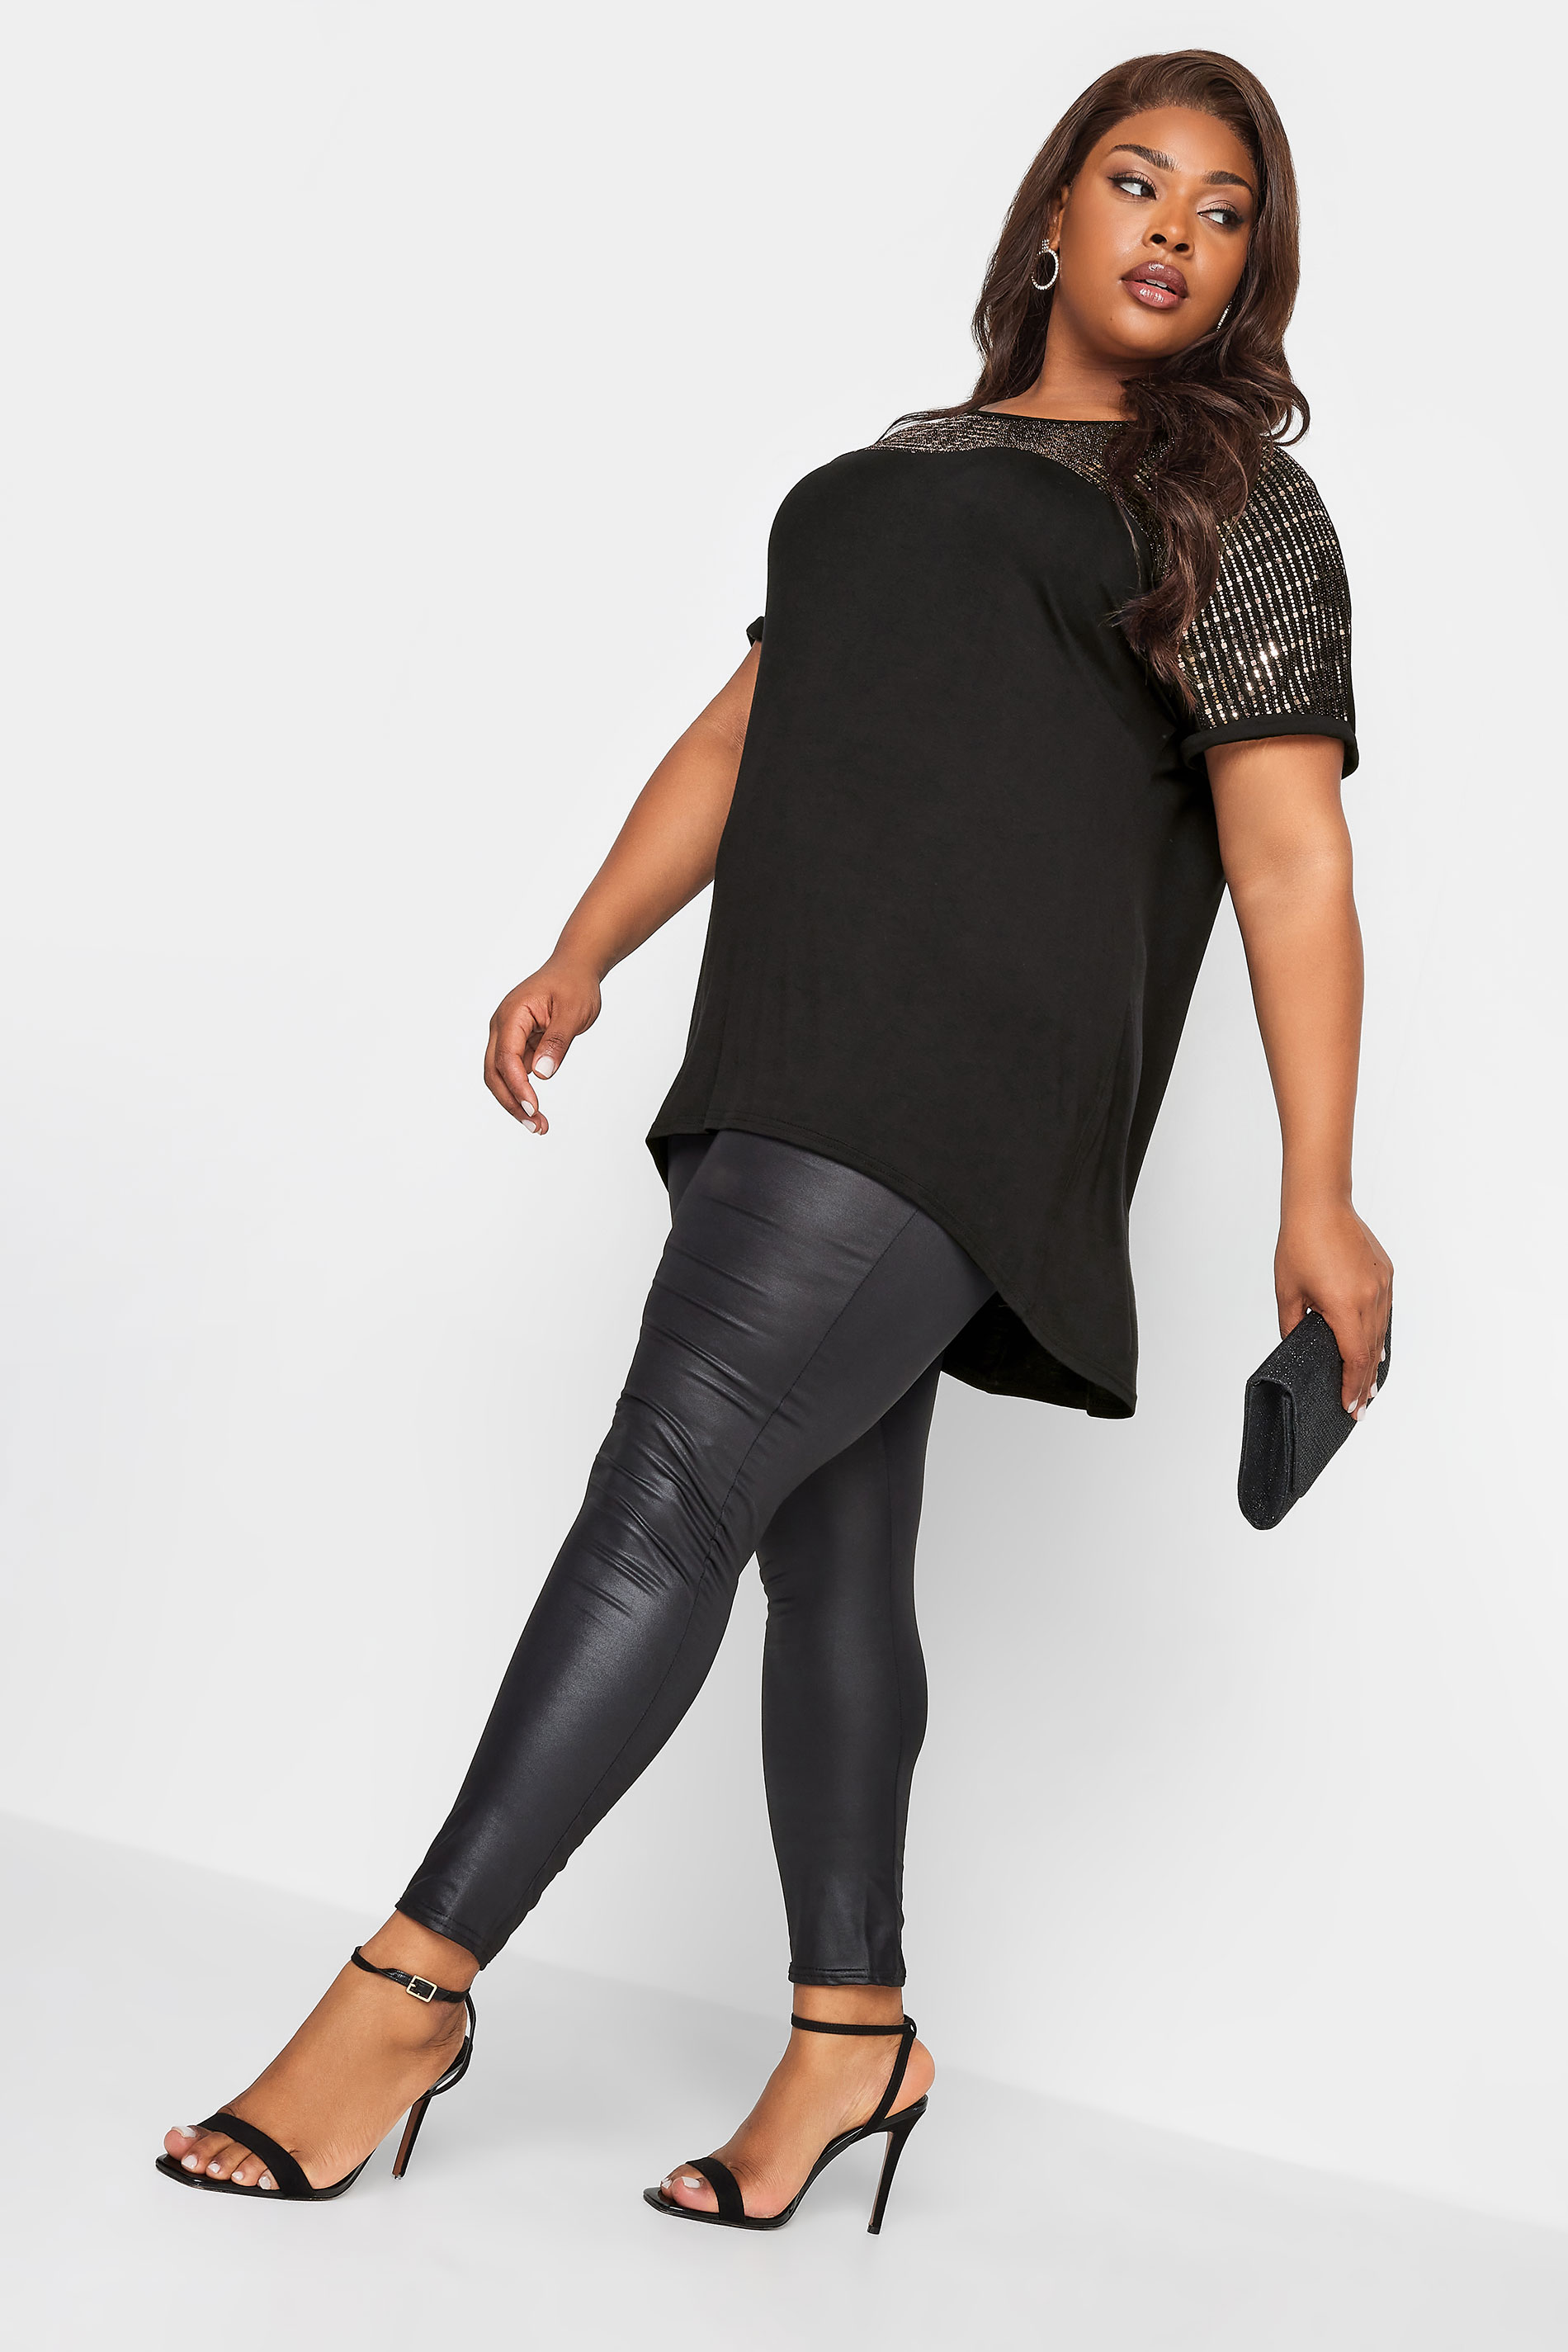 YOURS Plus Size Black & Rose Gold Sequin Embellished Top | Yours Clothing 2